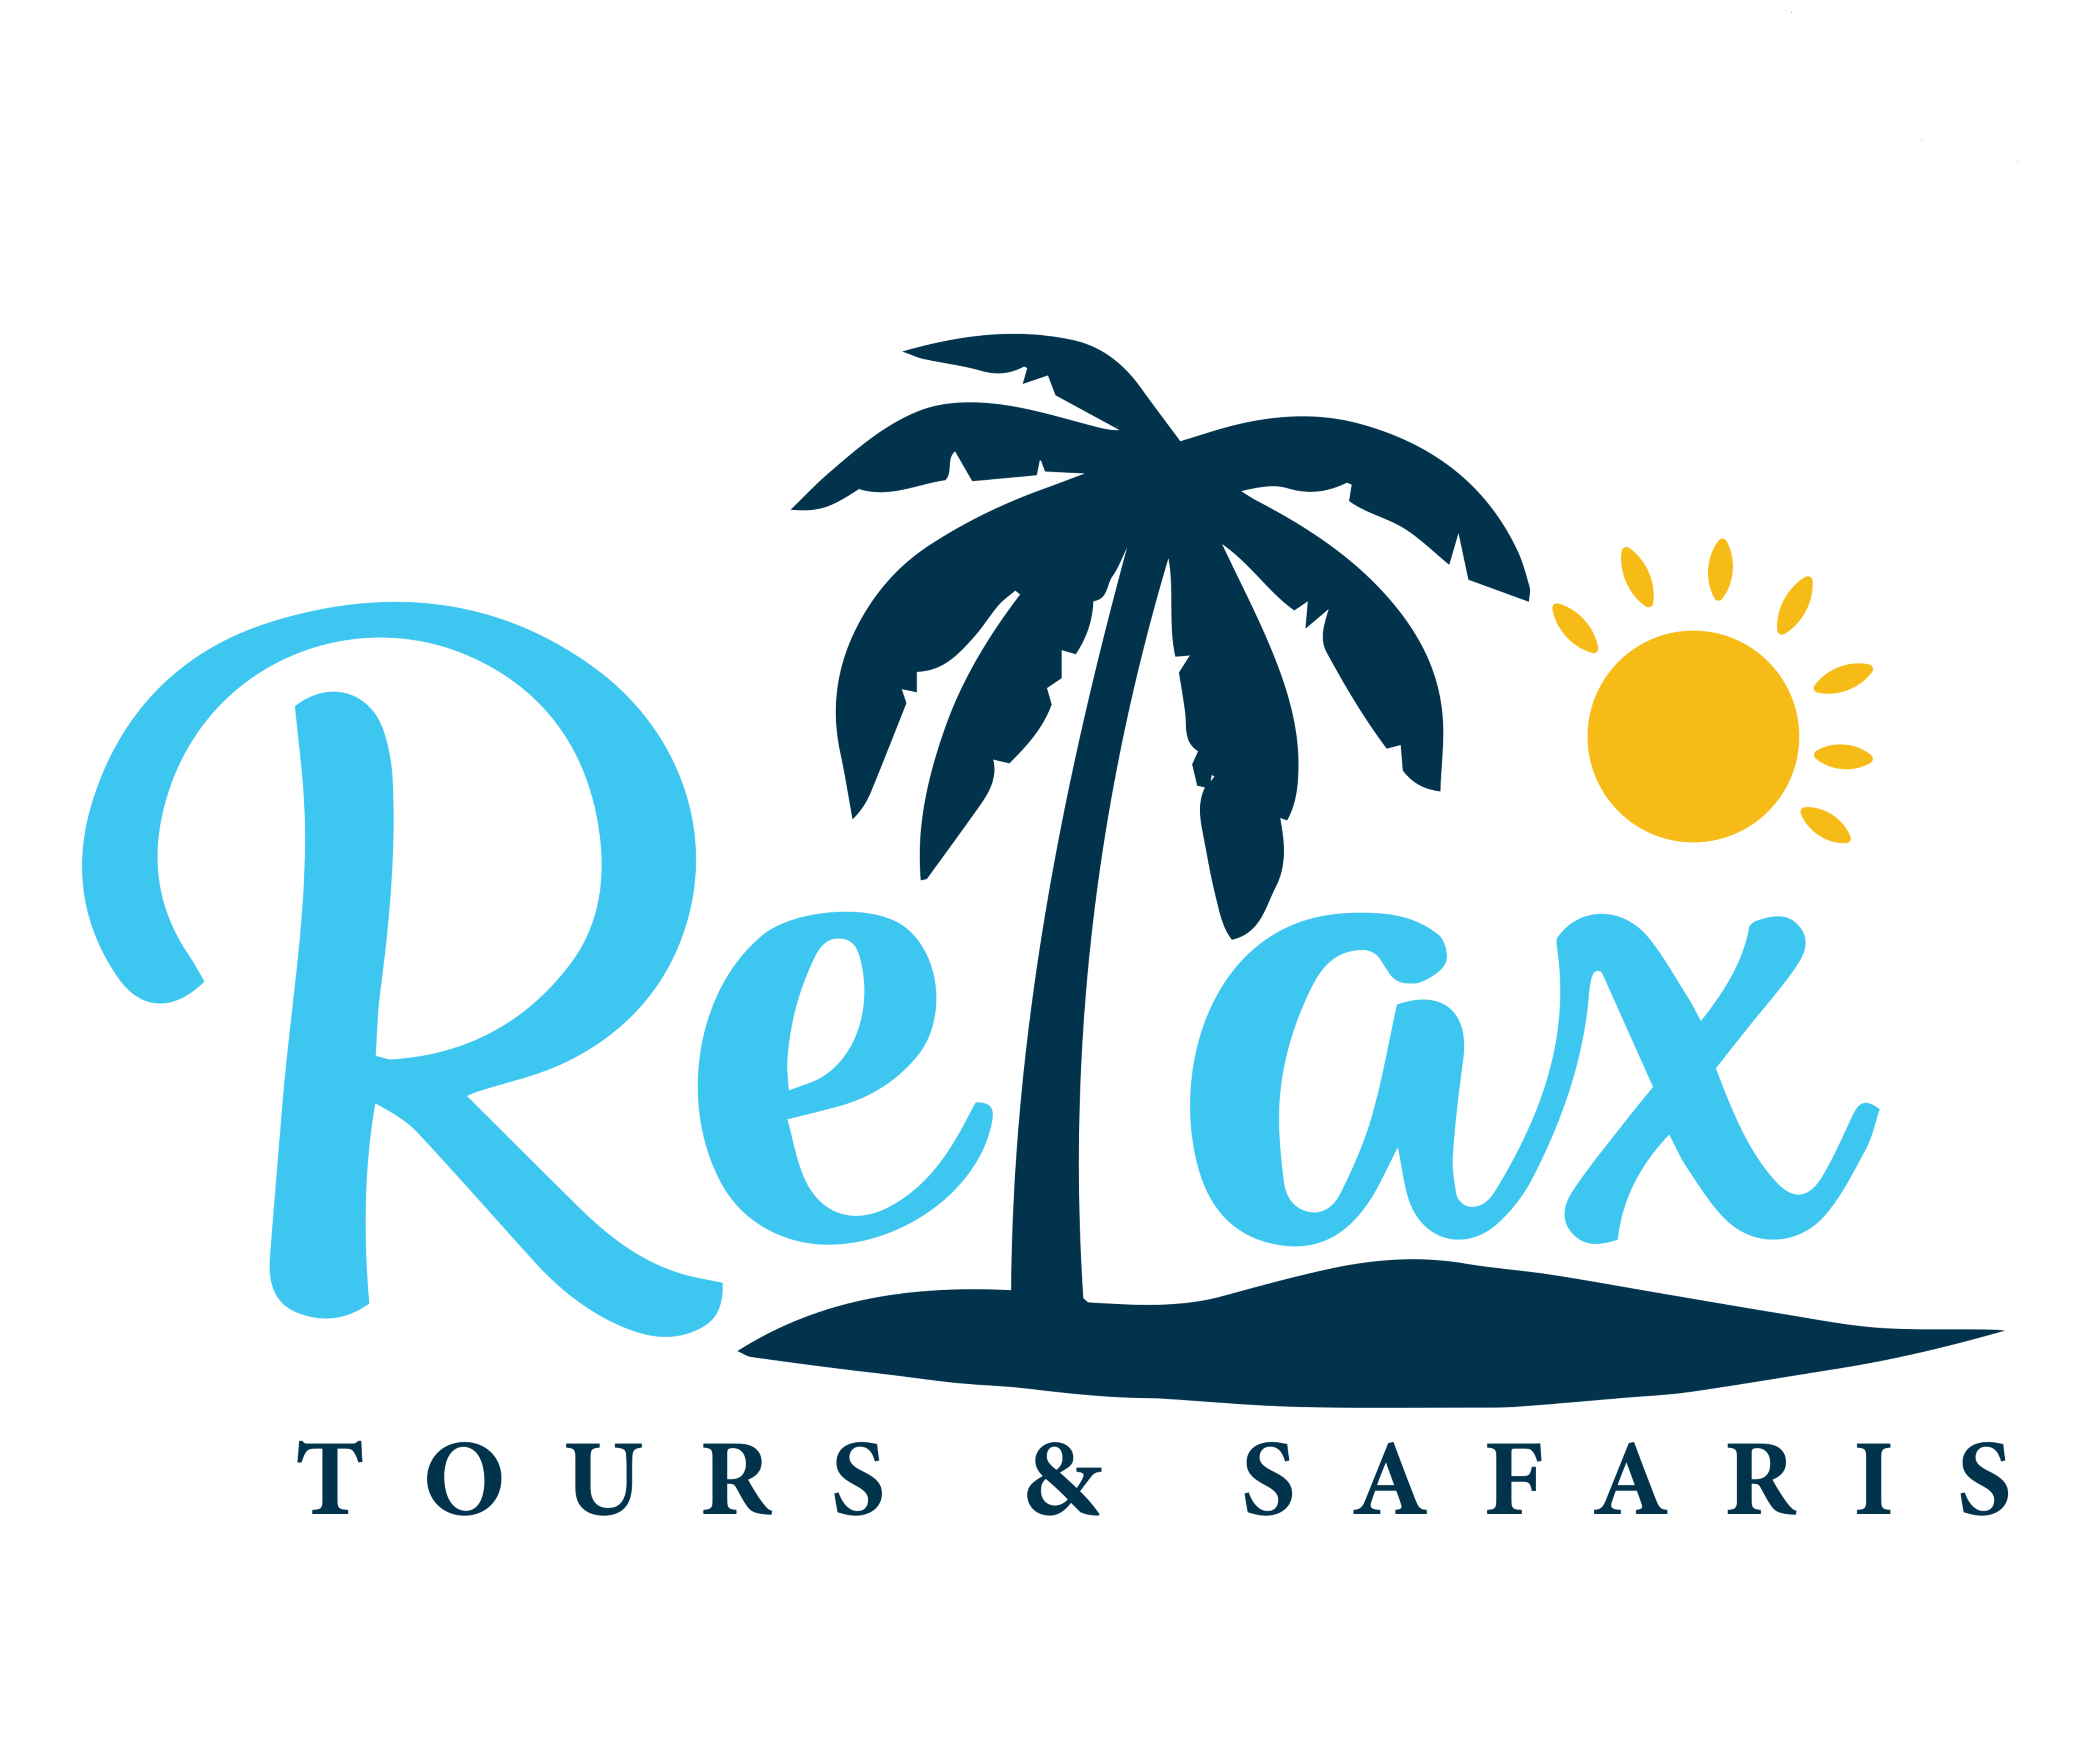 Relax Tours and safaris company